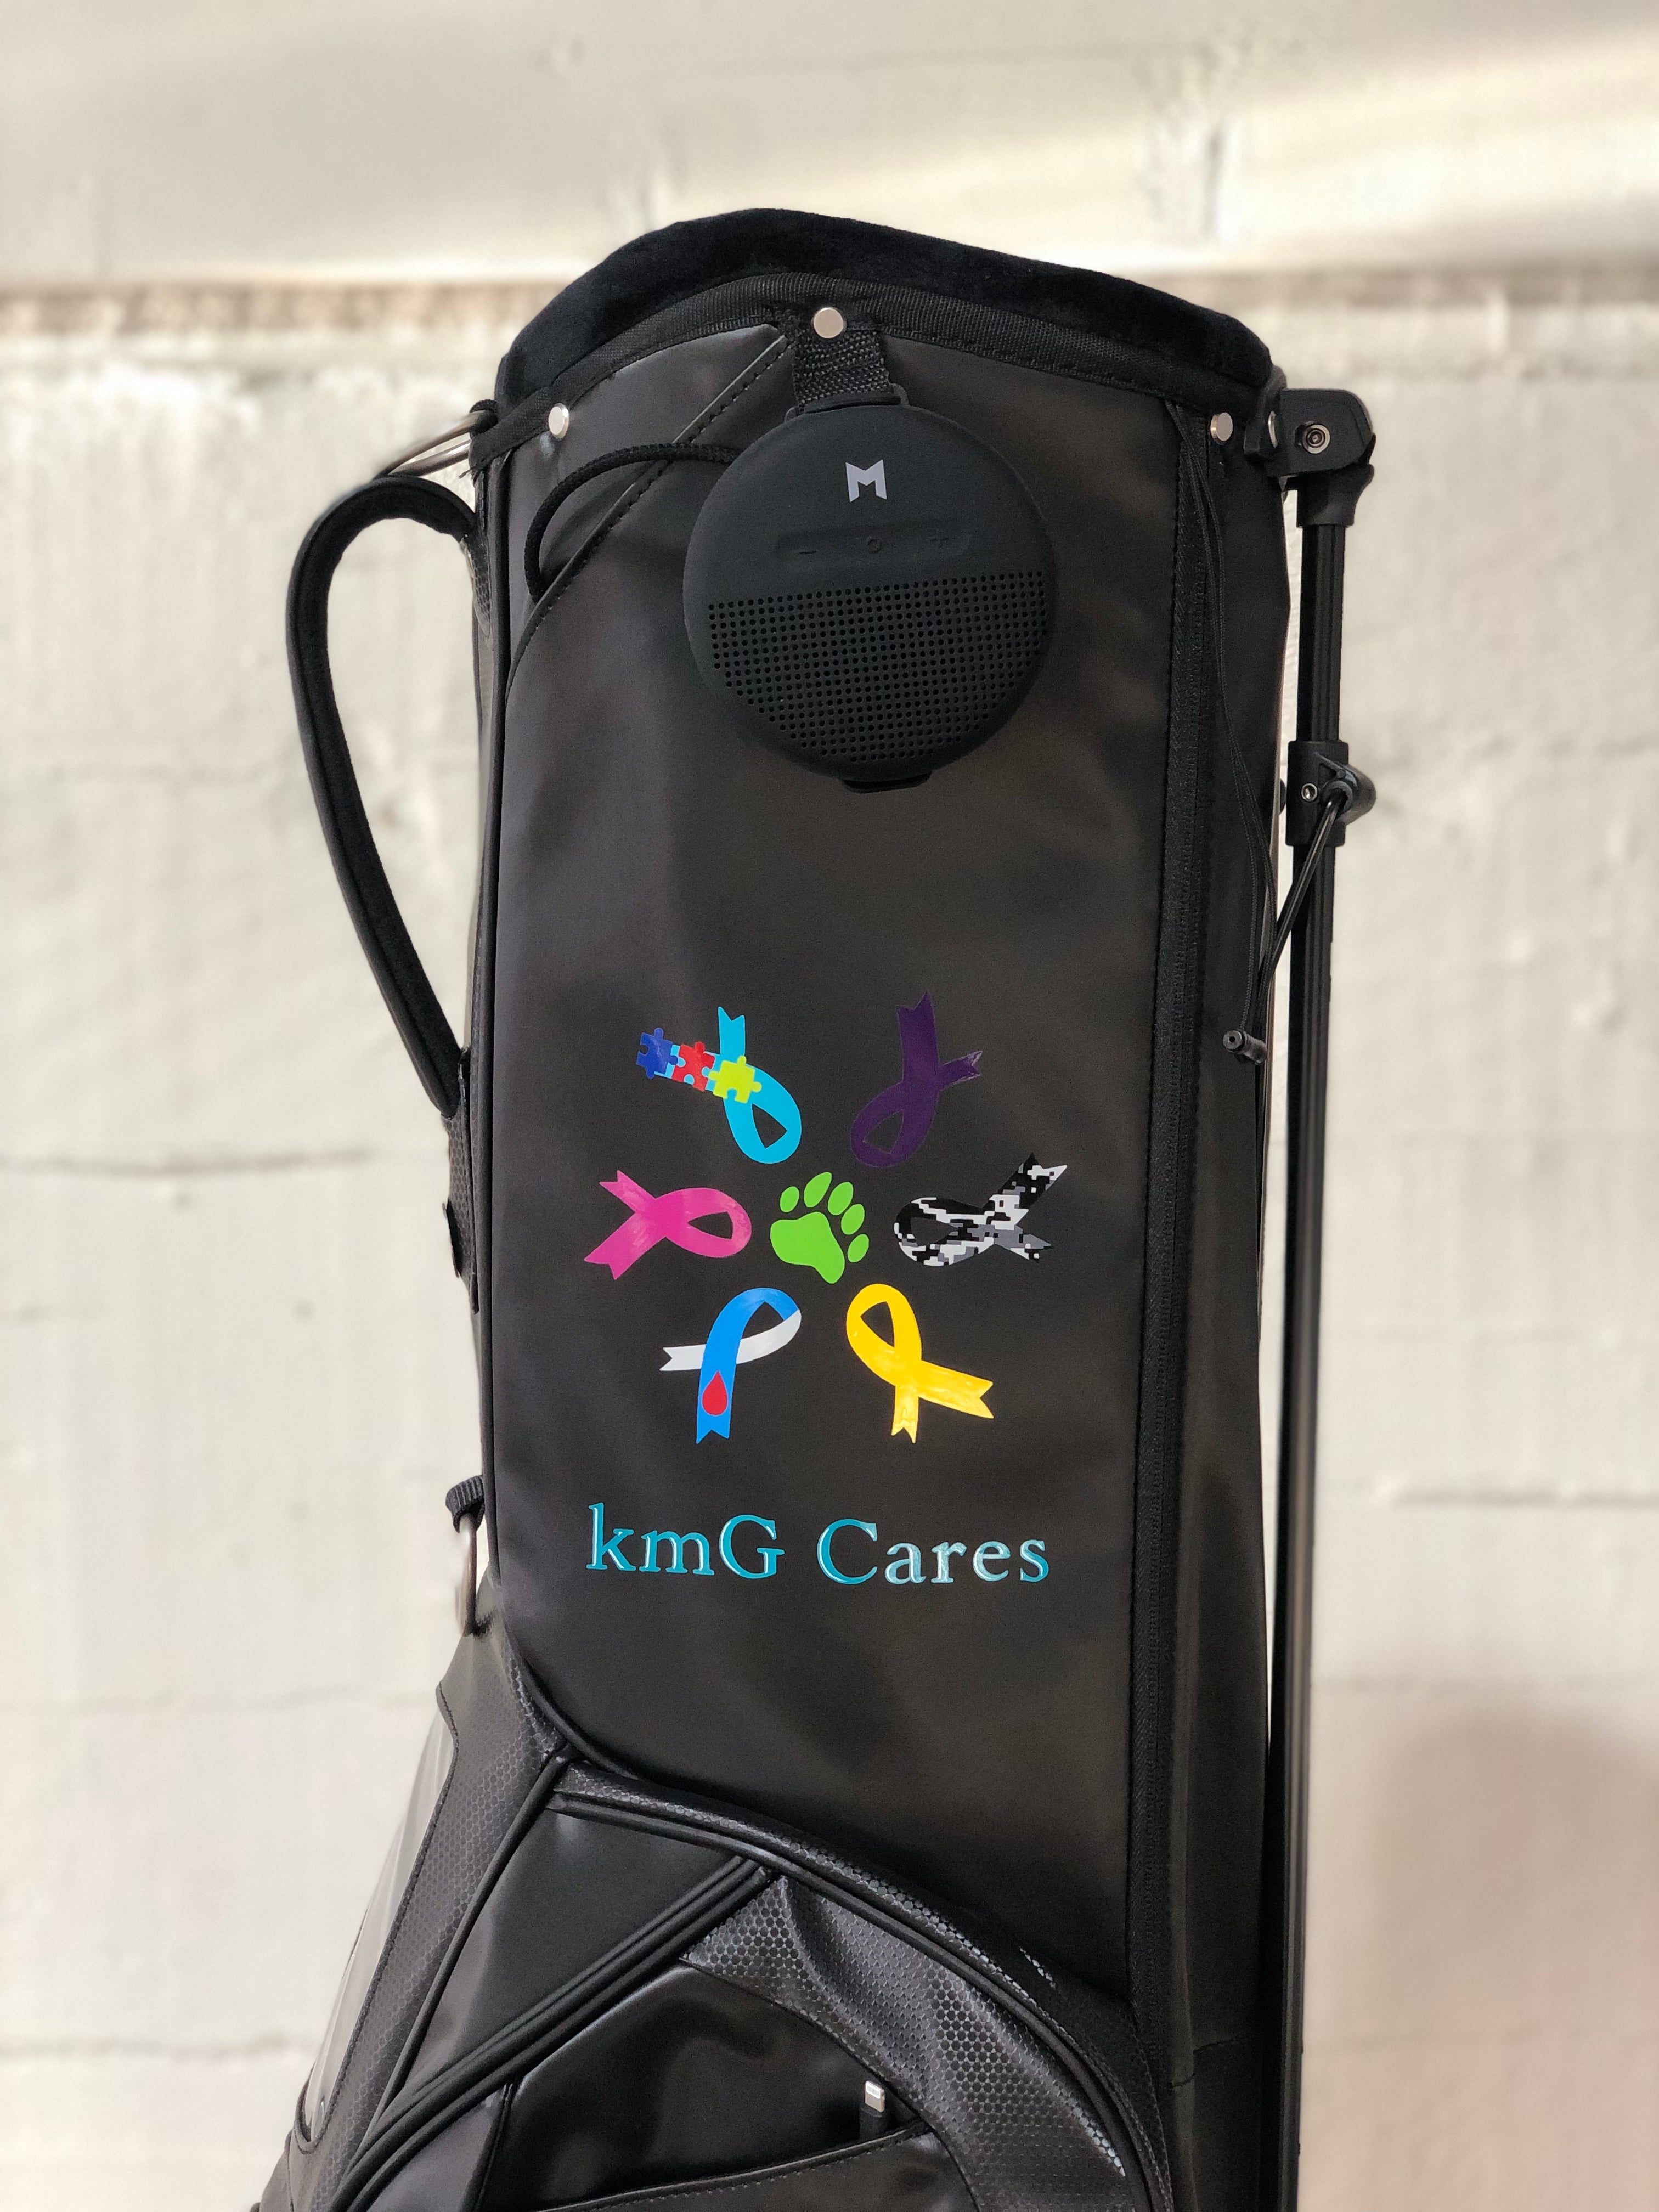 MNML GOLF black golf bag with KMG company logo painted on side panel.